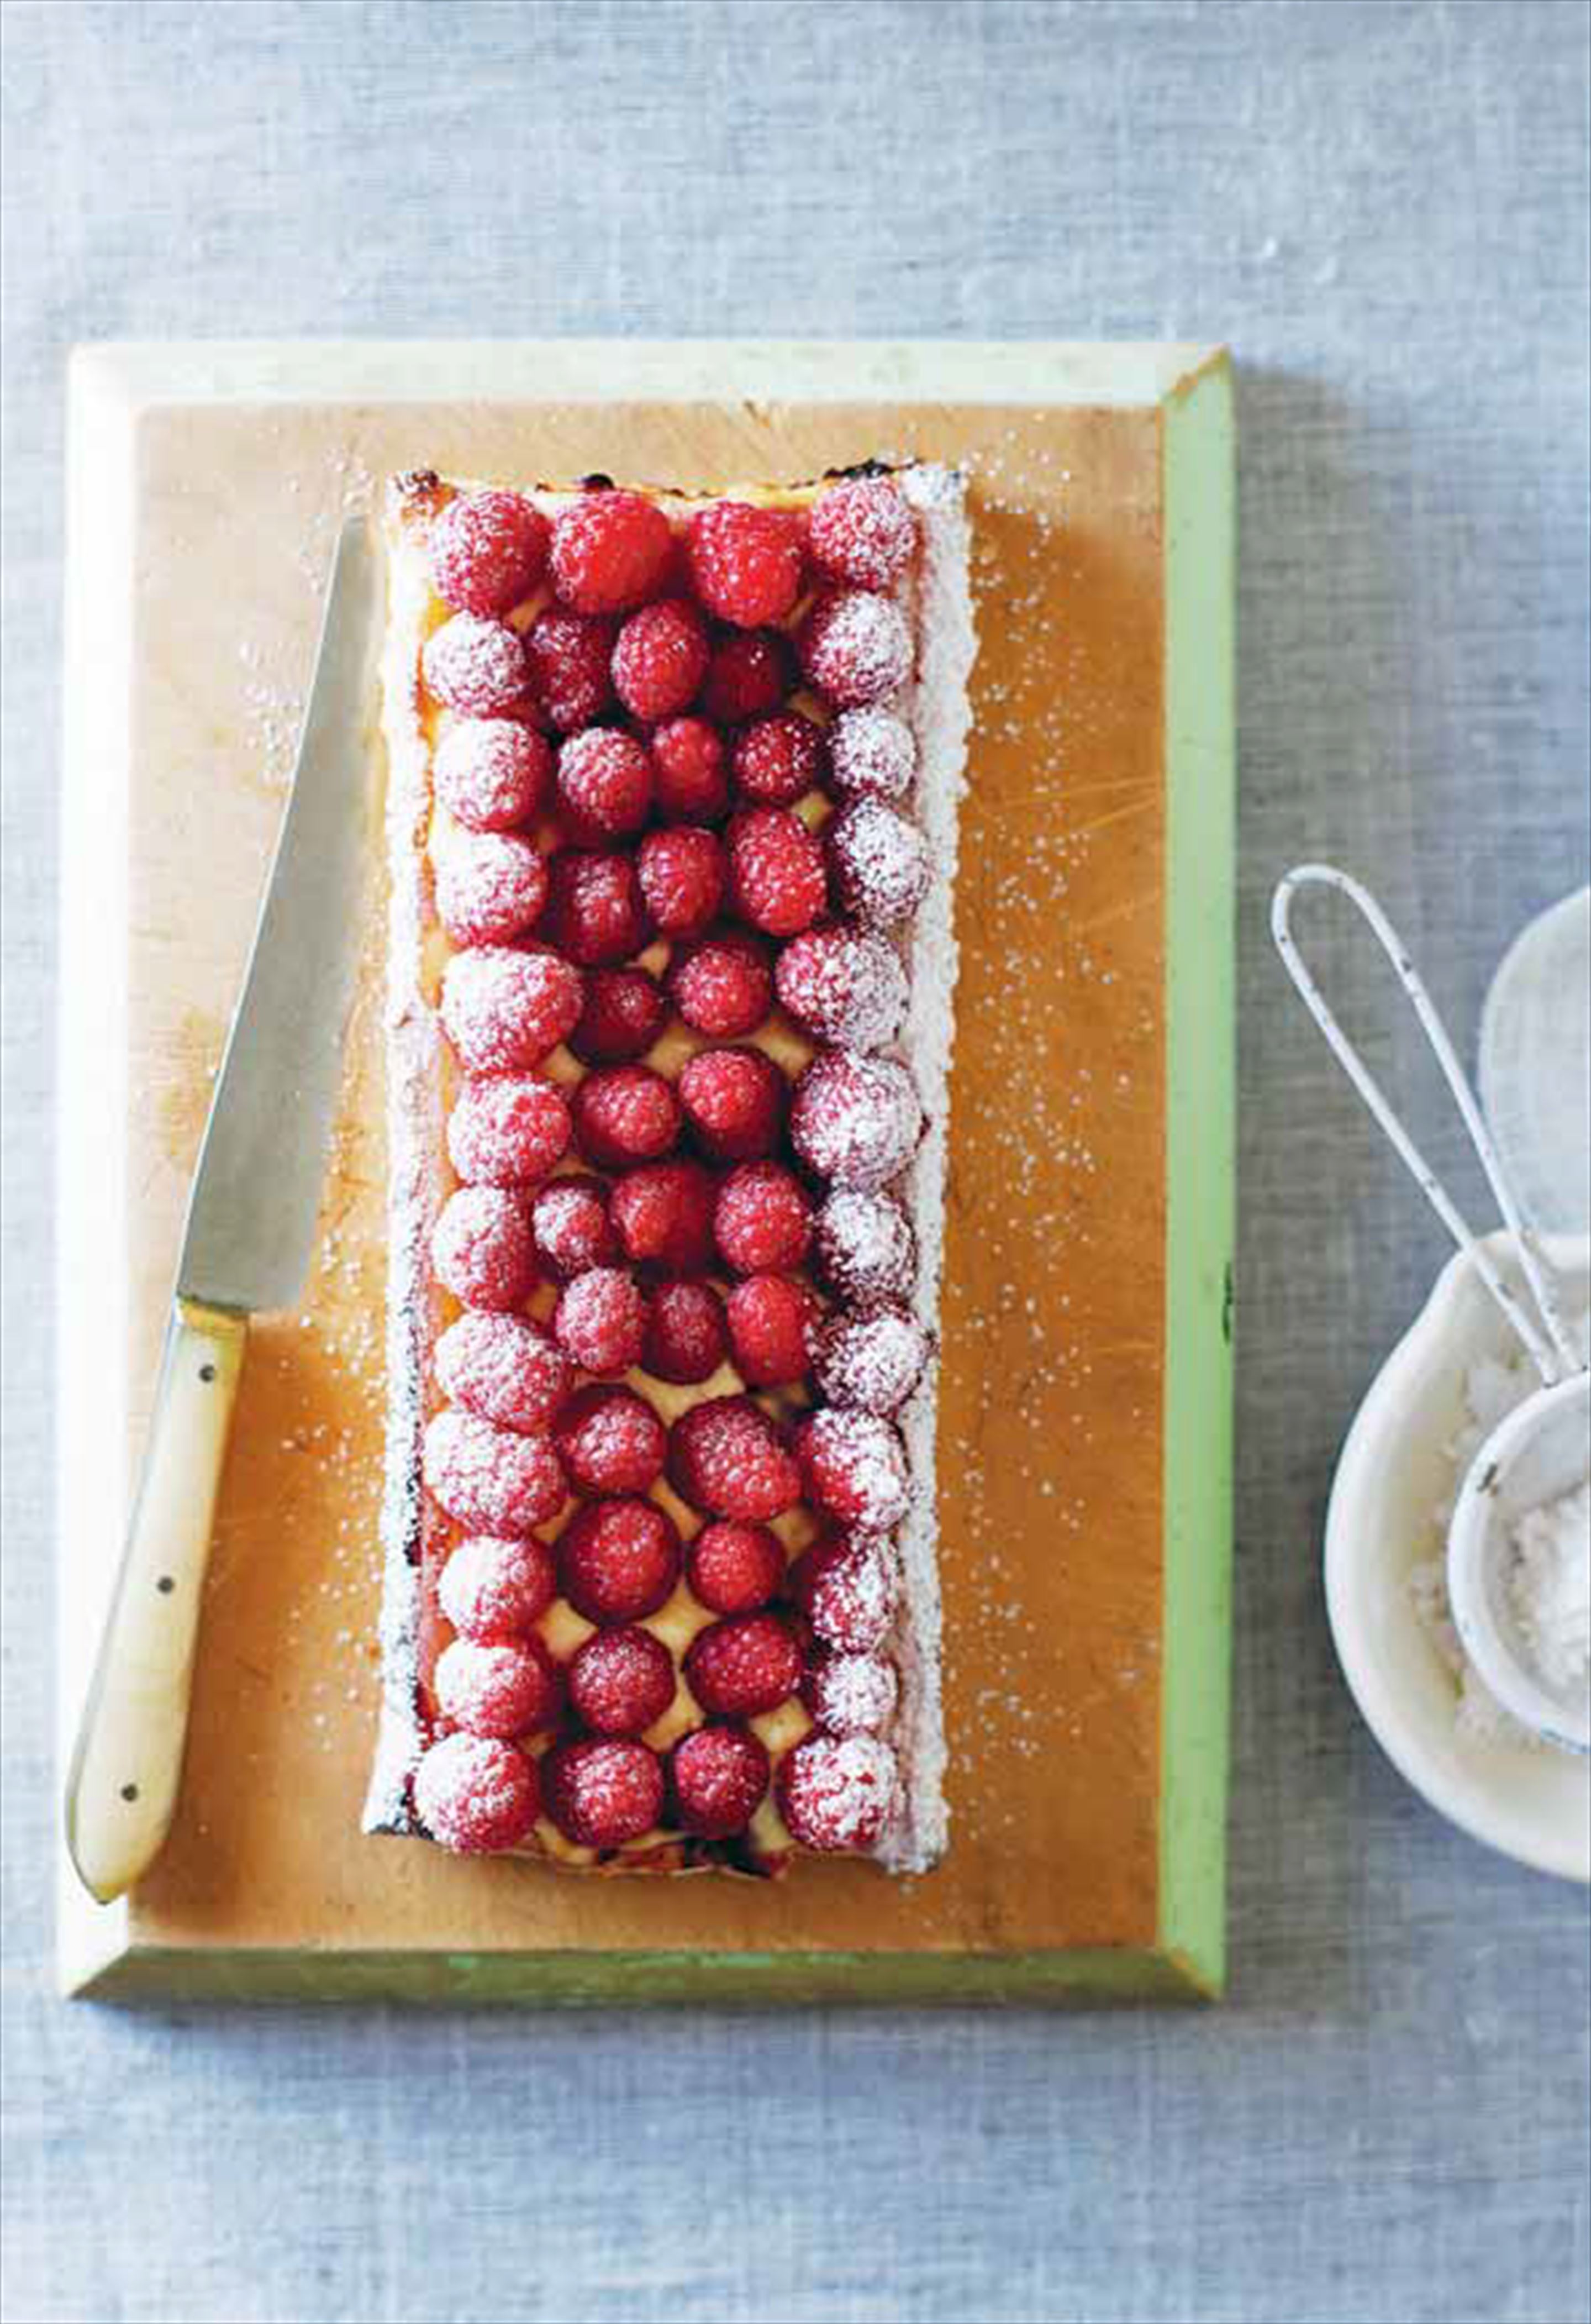 Raspberry and passionfruit tart